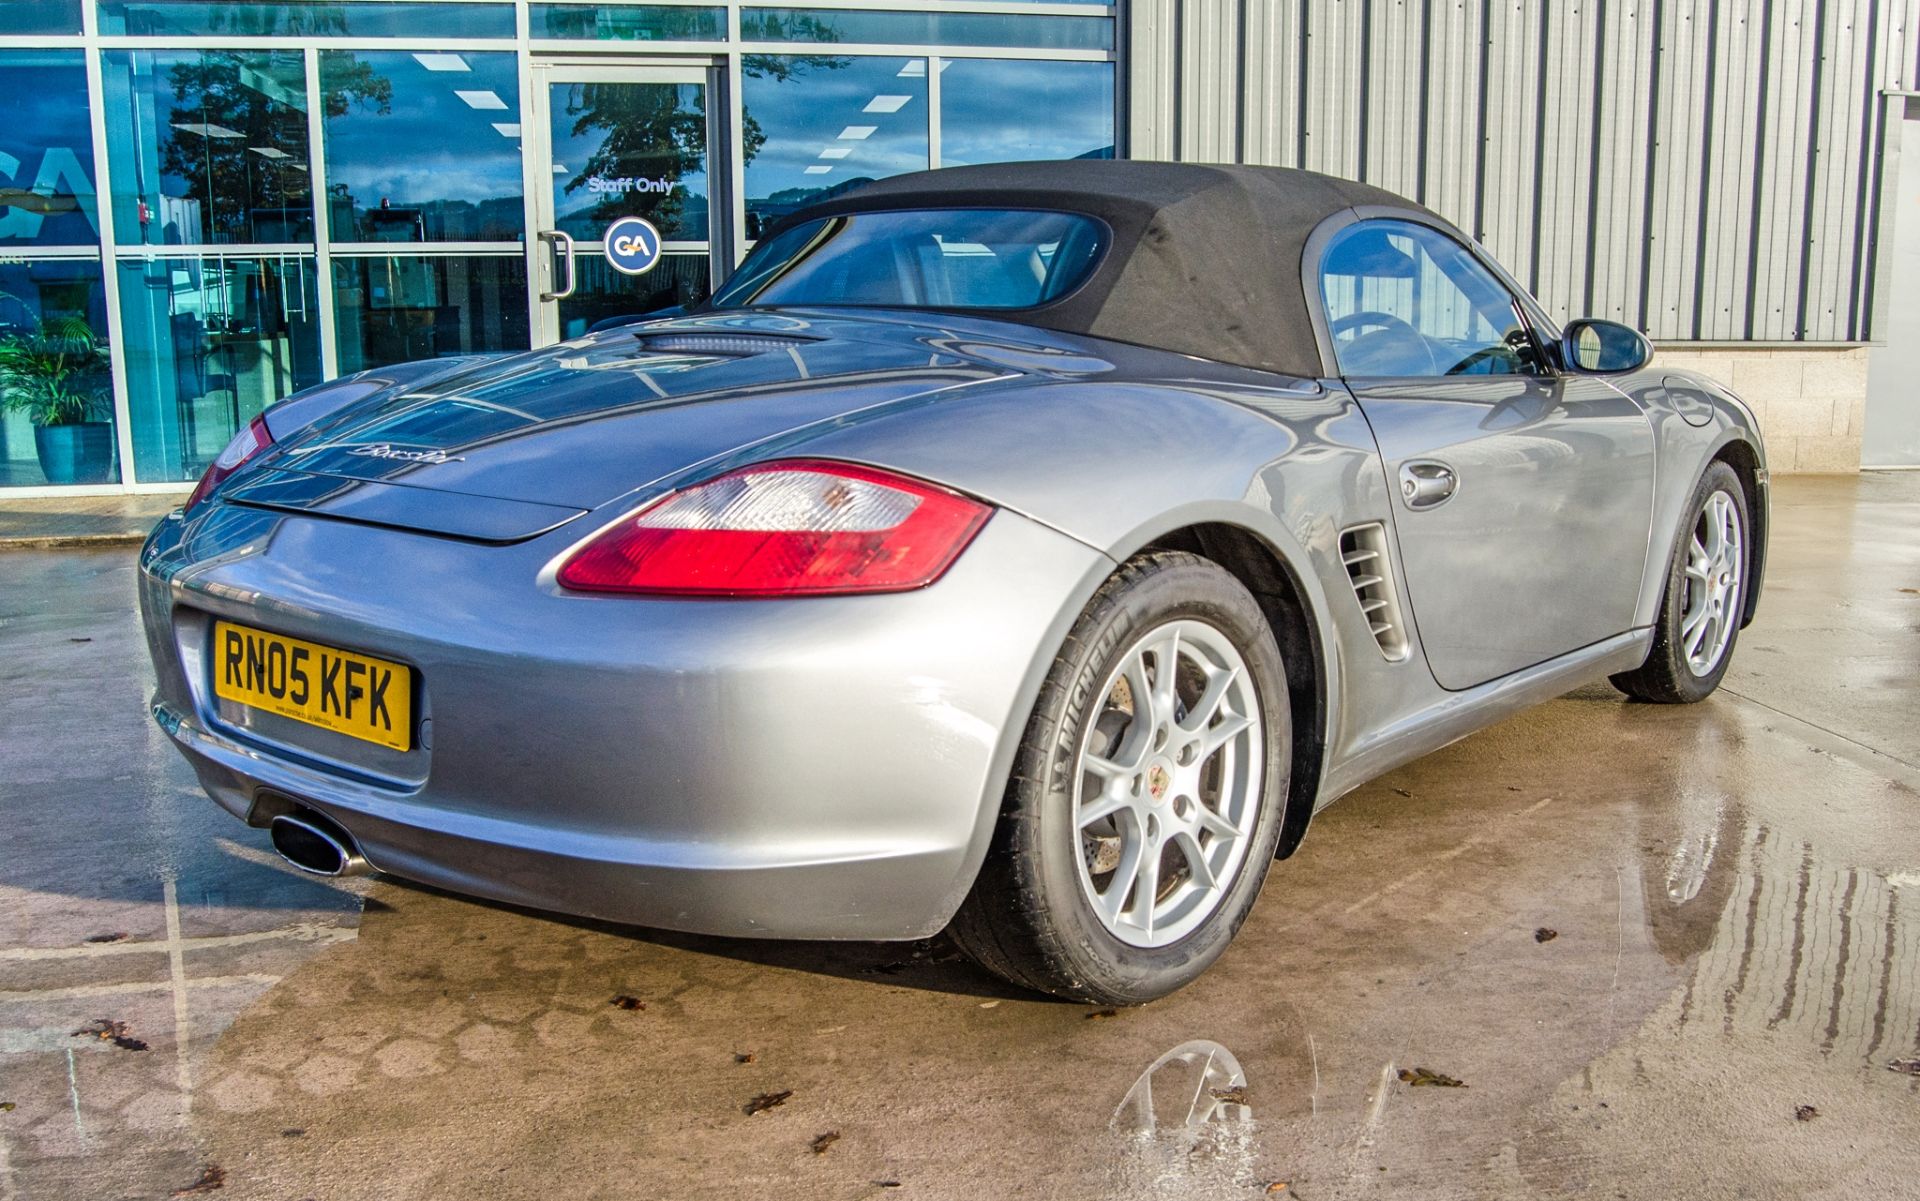 Porsche Boxster 2.7 litre 5 speed manual convertible roadster Registration Number: RN05 KFK Date - Image 3 of 45